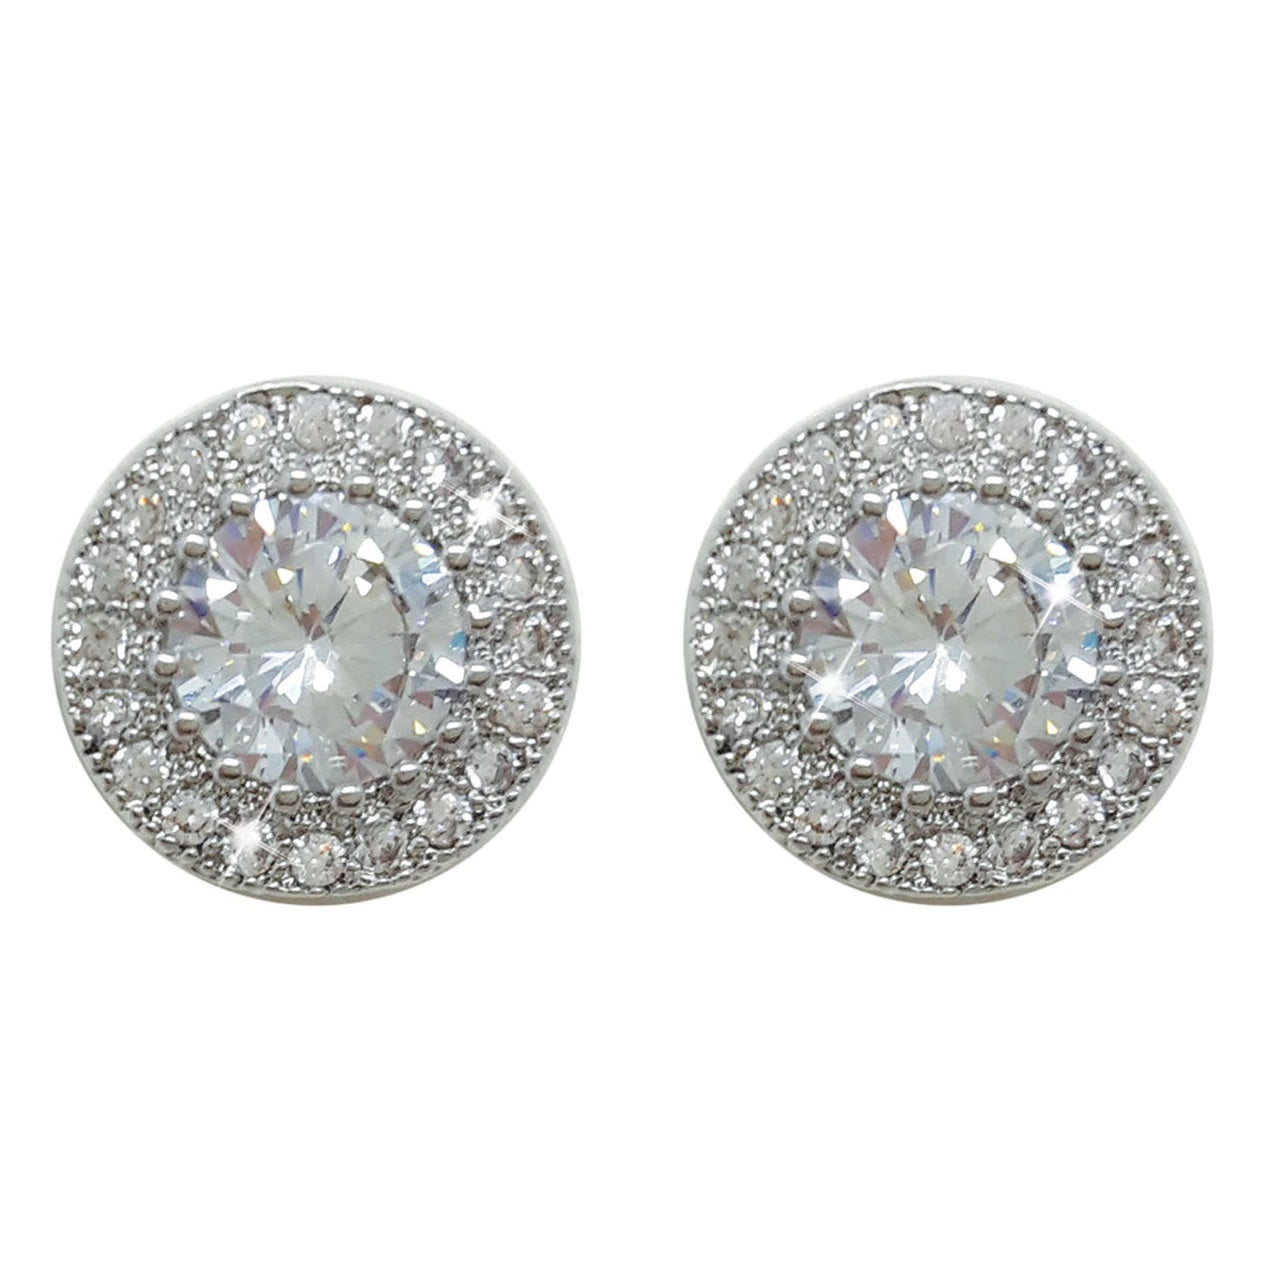 Tipperary Crystal Silver Round Earrings Pave Set Surround  Perfect for day or evening wear, these elegant pavé set earrings will add sparkle with every turn of the head.